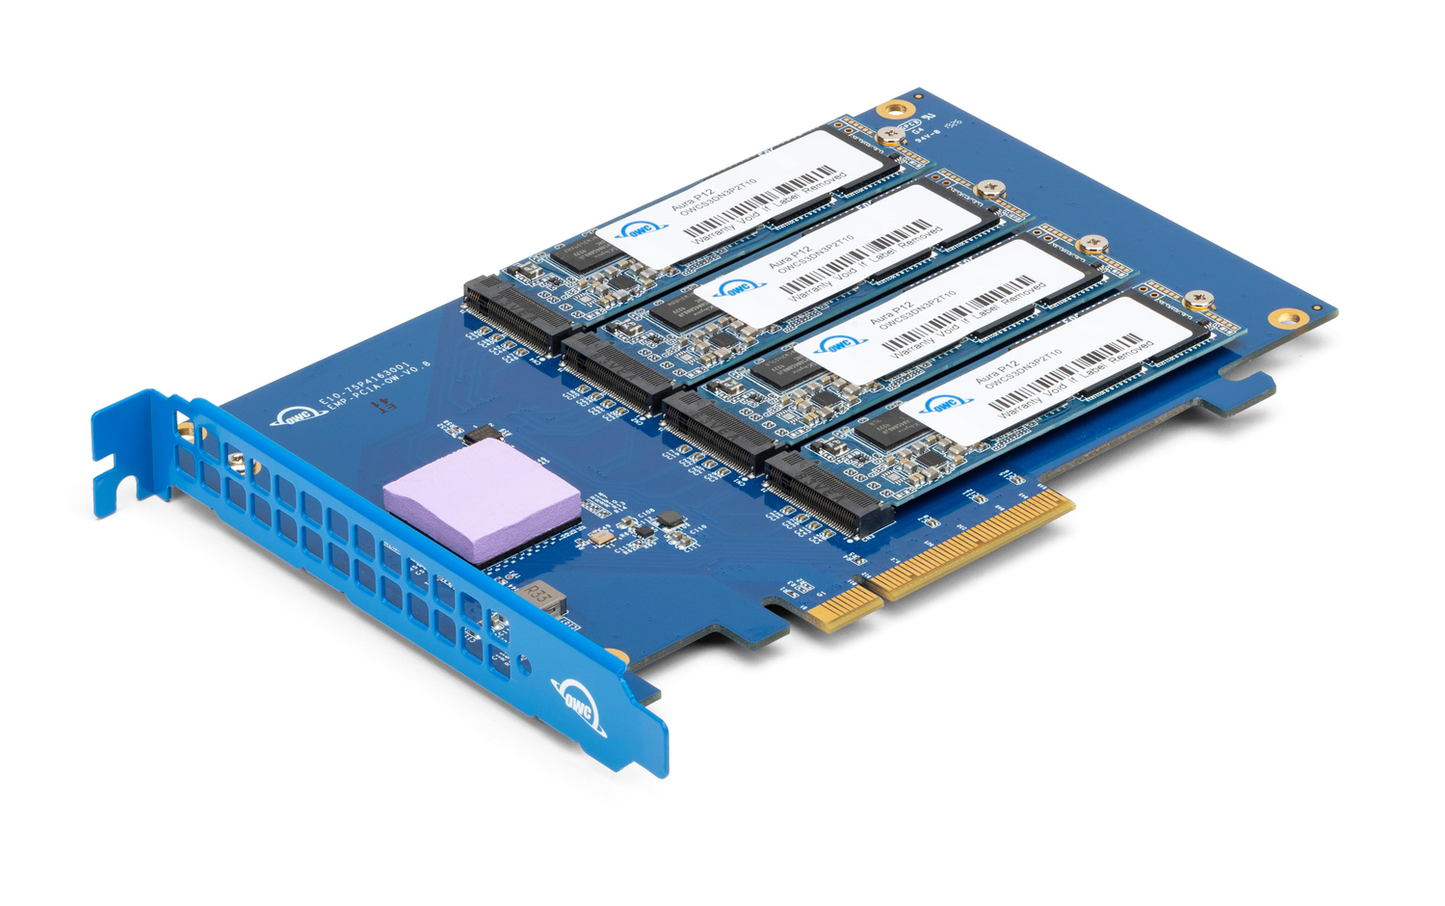 16.0TB OWC Accelsior 4M2 PCIe 3.0 NVMe M.2 SSD Storage Solution. OWC's fastest SSD ever with up to 6000MB/s speed for large format video editing, VR/AR/MR environments, extreme gaming, and other high bandwidth needs. Powered by SoftRAID.